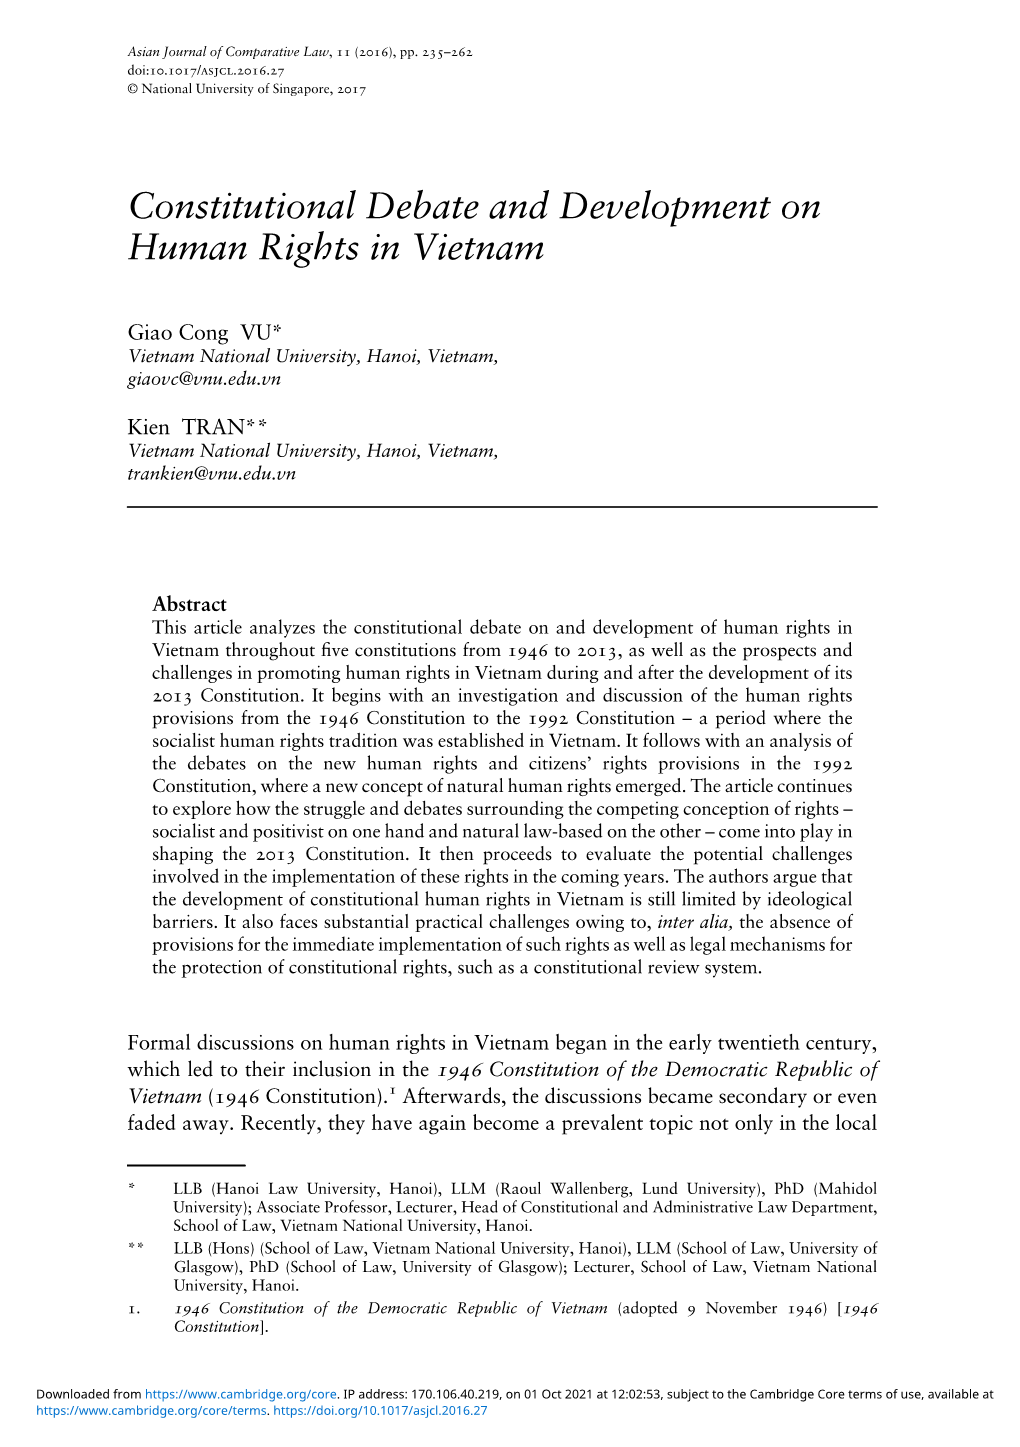 Constitutional Debate and Development on Human Rights in Vietnam